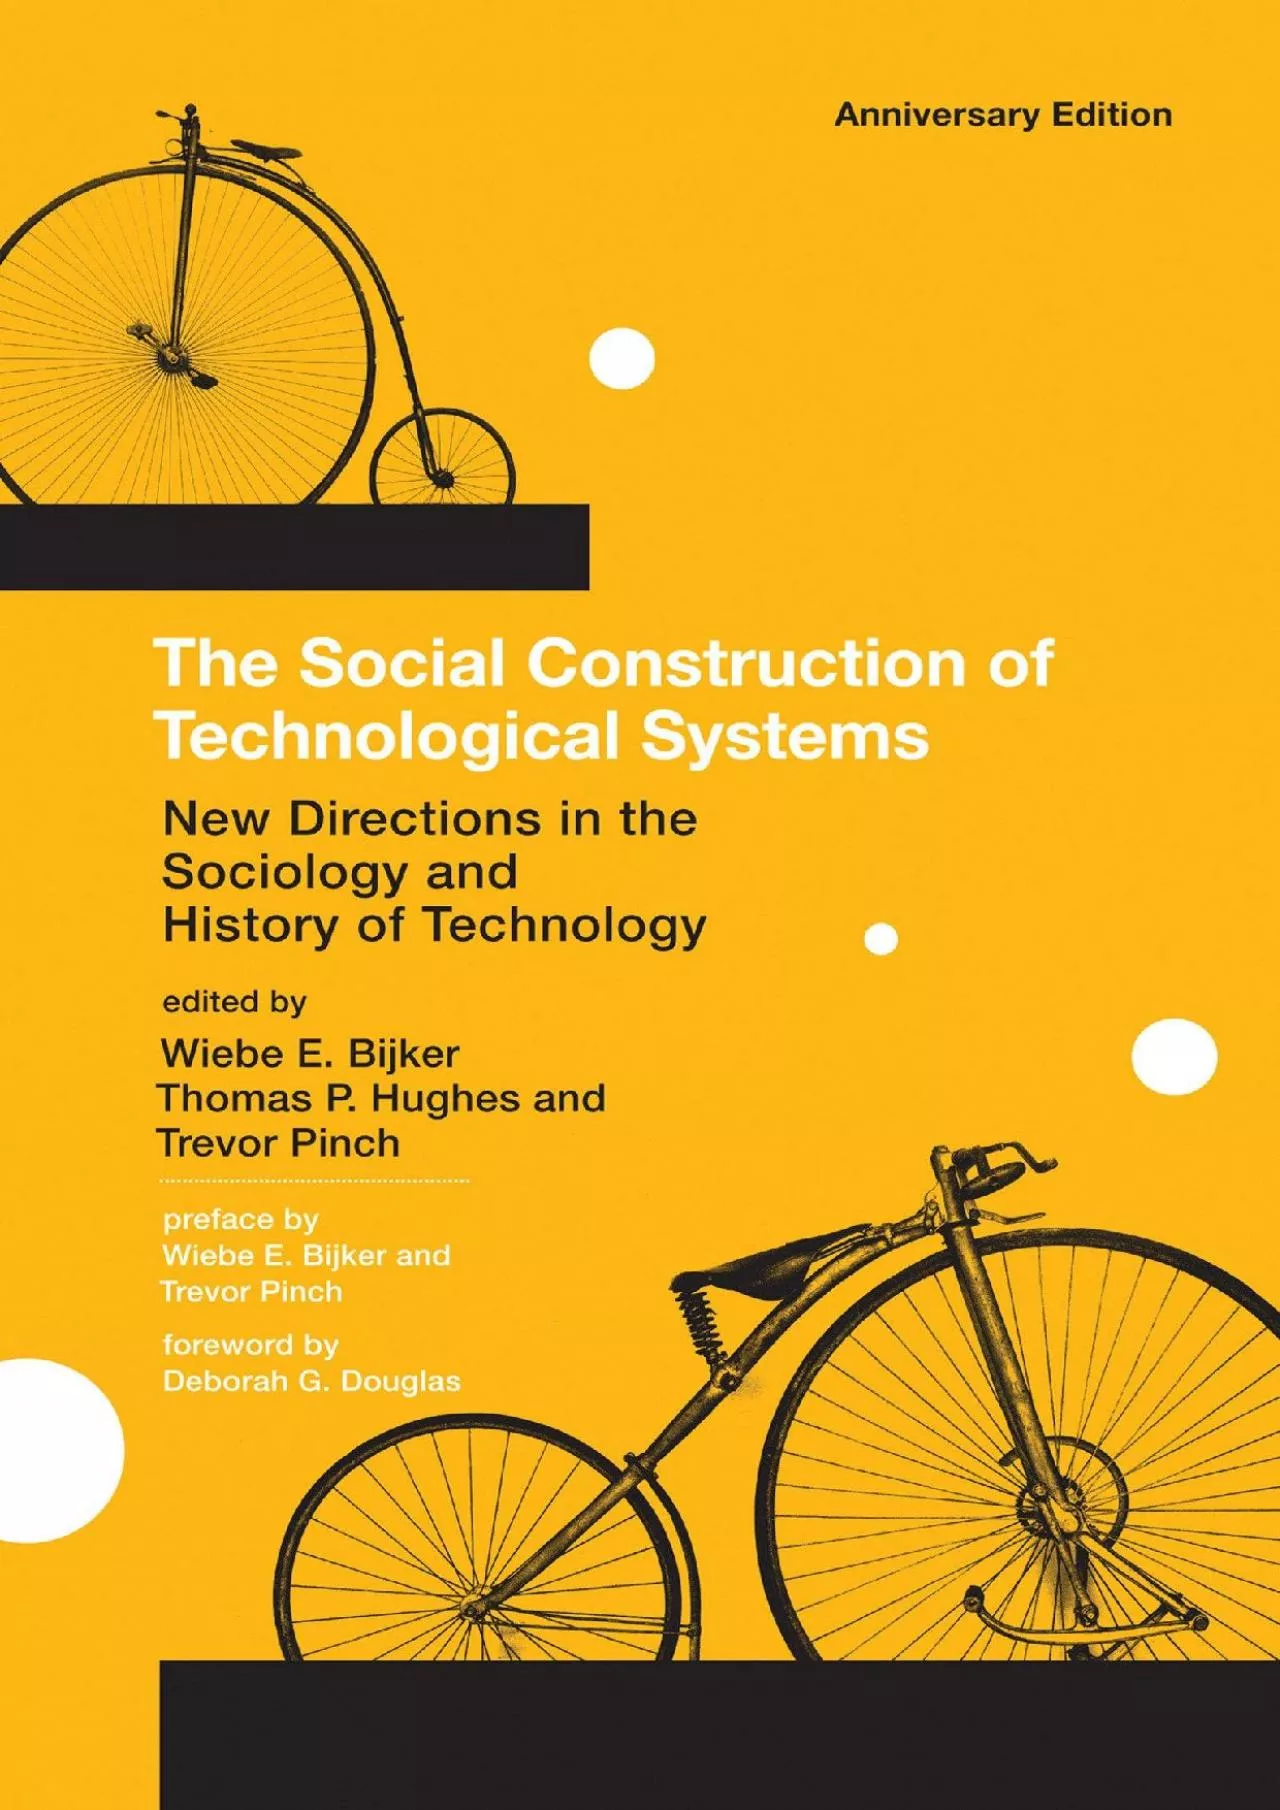 [READ]-The Social Construction of Technological Systems, anniversary edition: New Directions